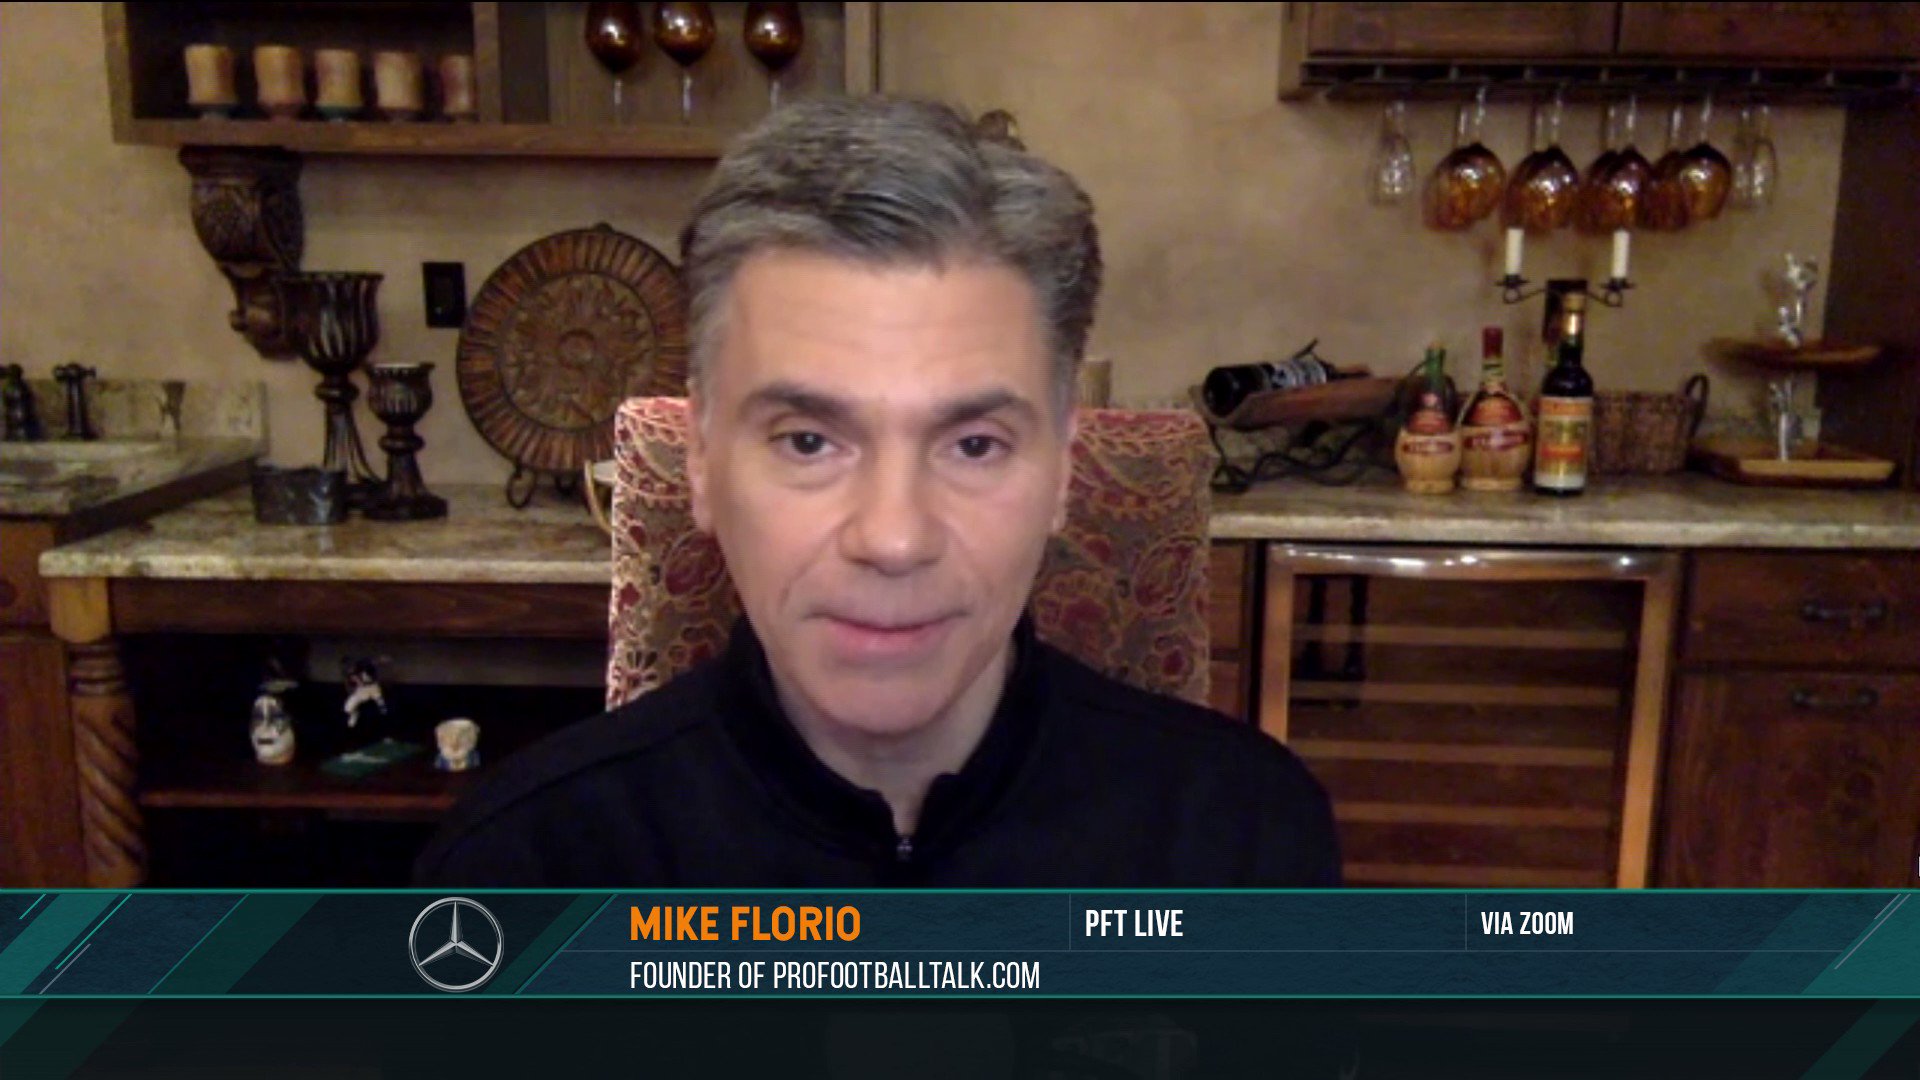 Dan Patrick Show on X: 'Mike Florio (@ProFootballTalk) says he expects the  #NFL to move to an 18 game regular season schedule by no later than 2030.  Here's why For Mike's full